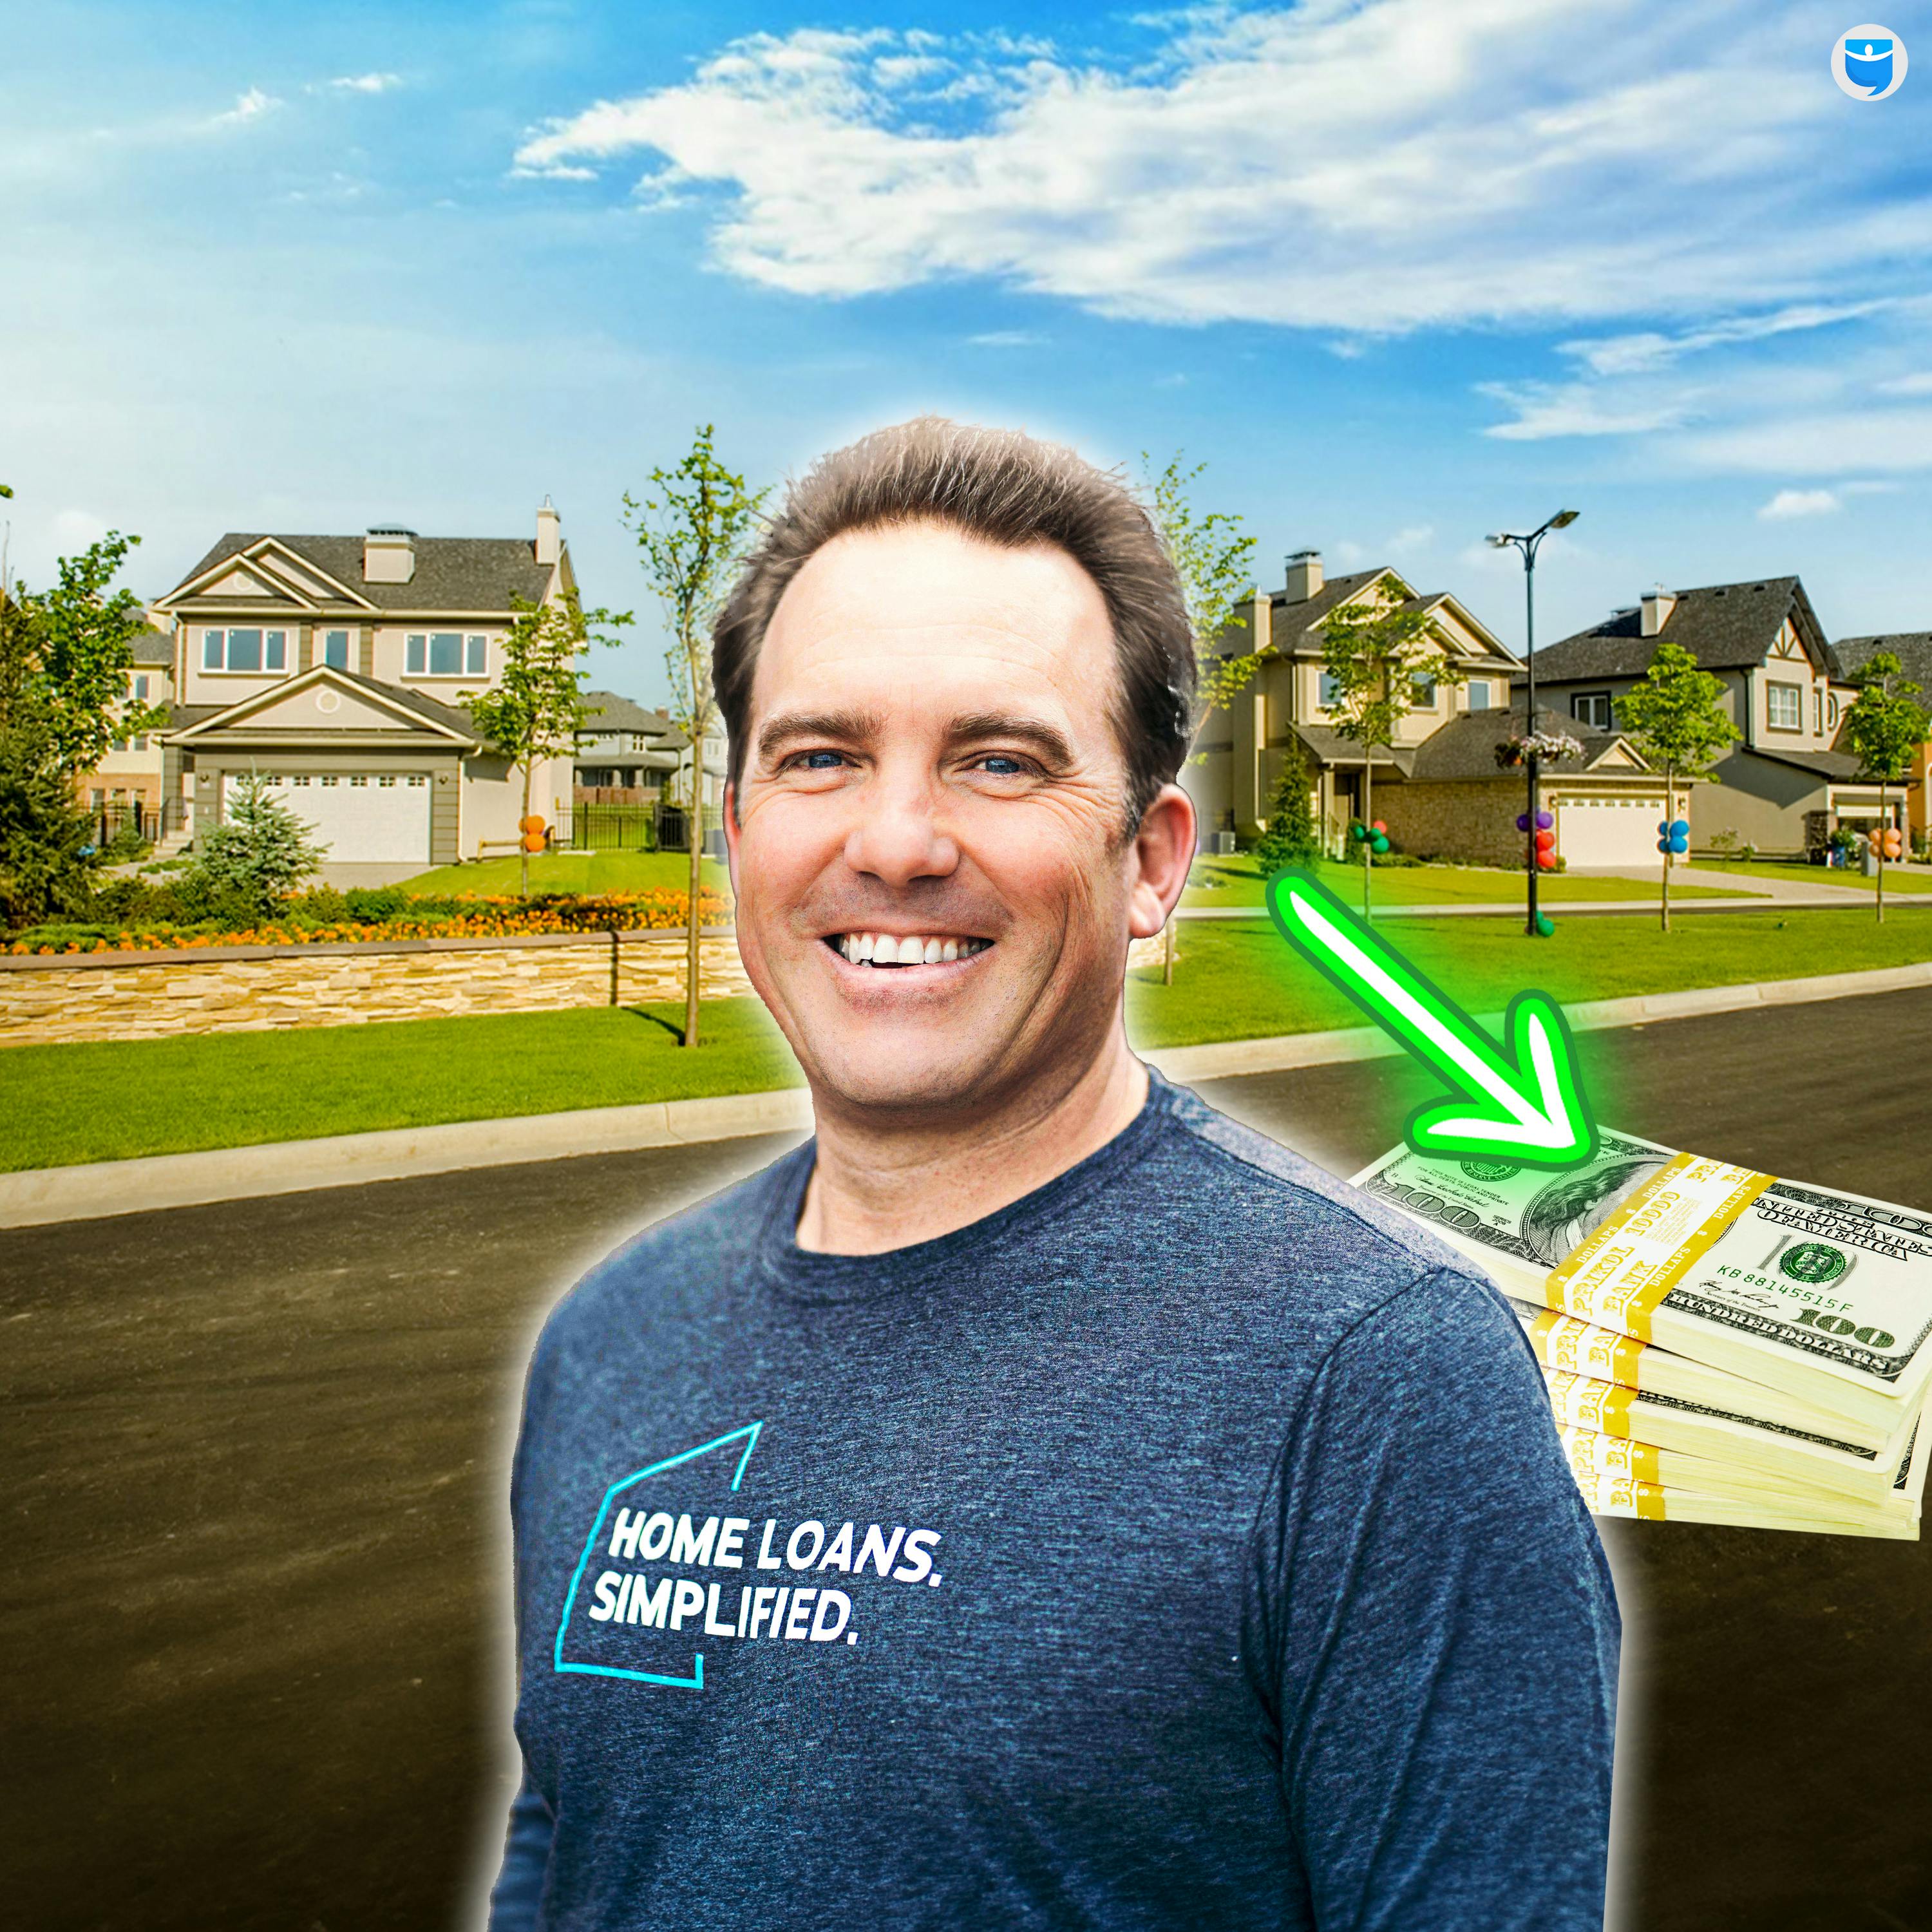 939: BiggerNews: 100% Financing for First-Time Home Buyers is HERE w/Jeff Welgan